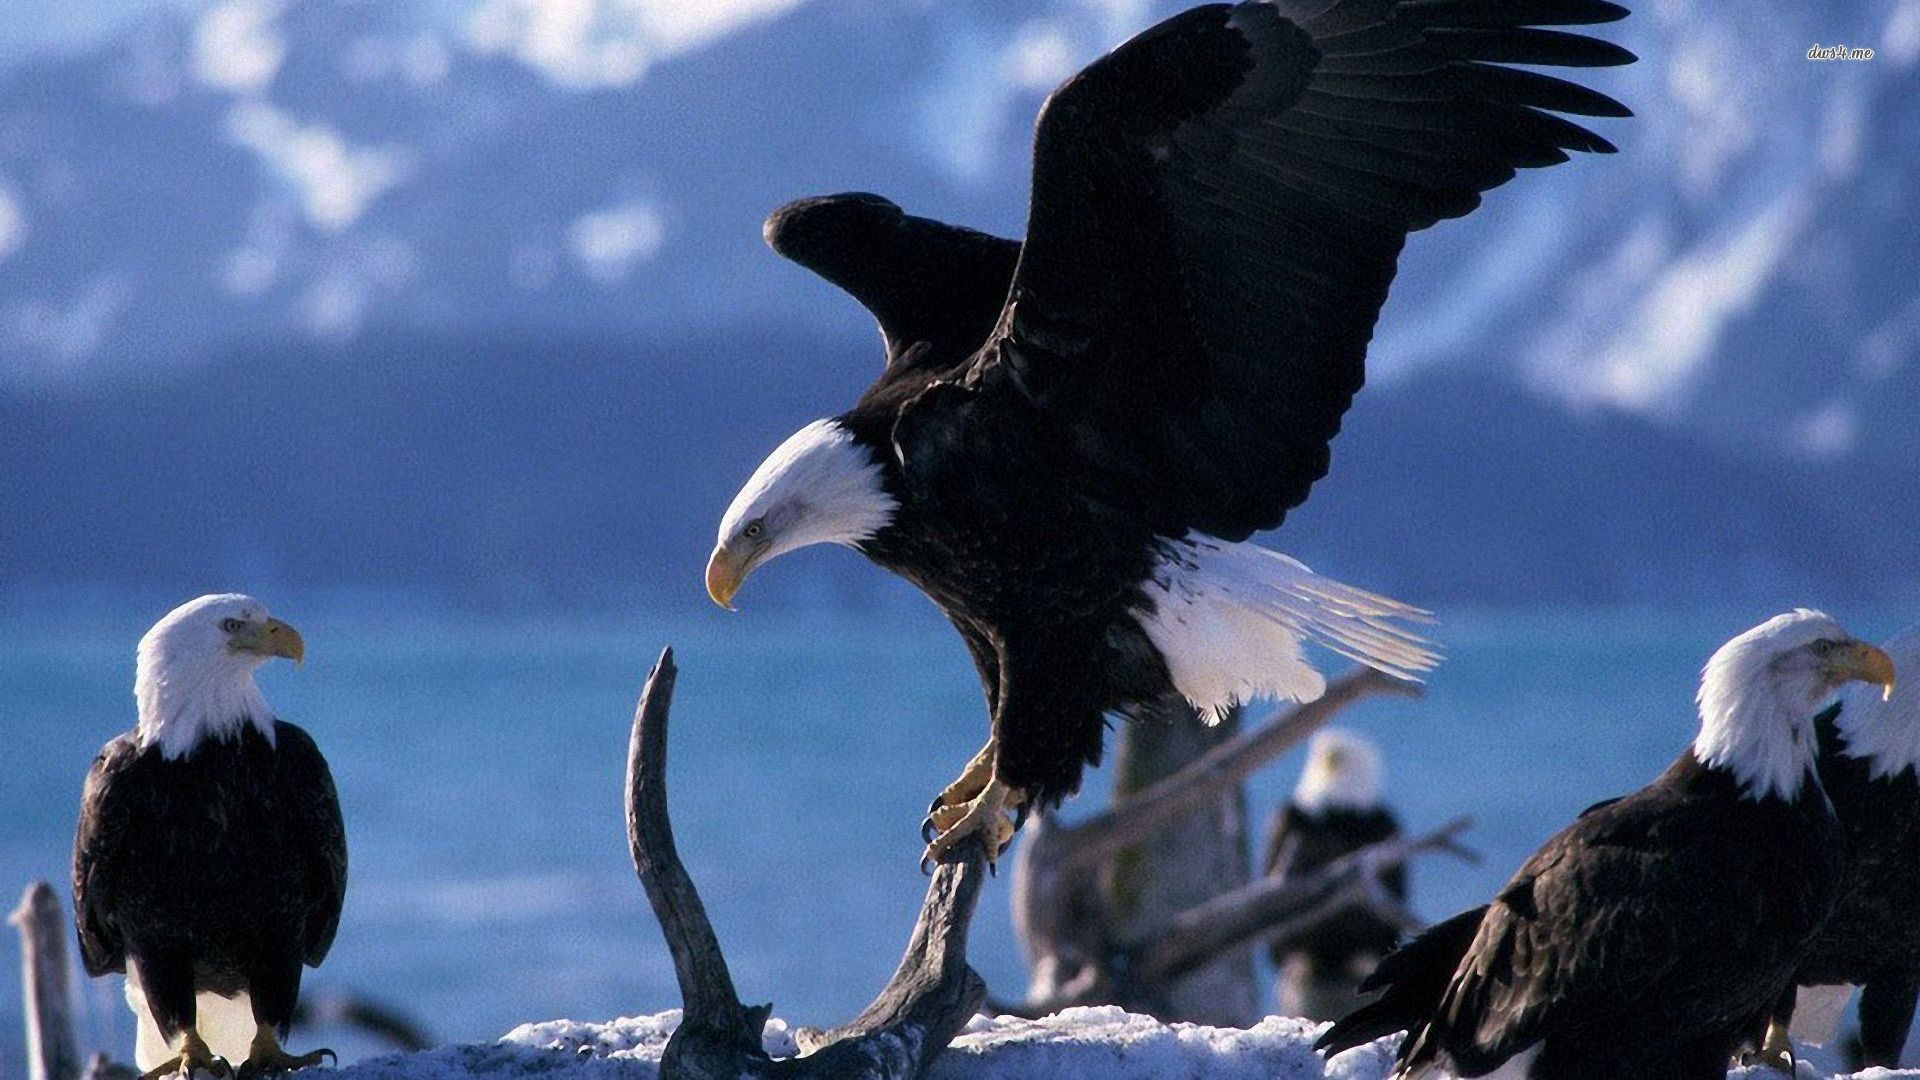 1920x1080 Flying Eagle HD Wallpapers, Flying Eagle Pictures, New Wallpapers |  Download Wallpaper | Pinterest | Eagle pictures, Hd wallpaper and Wallpaper